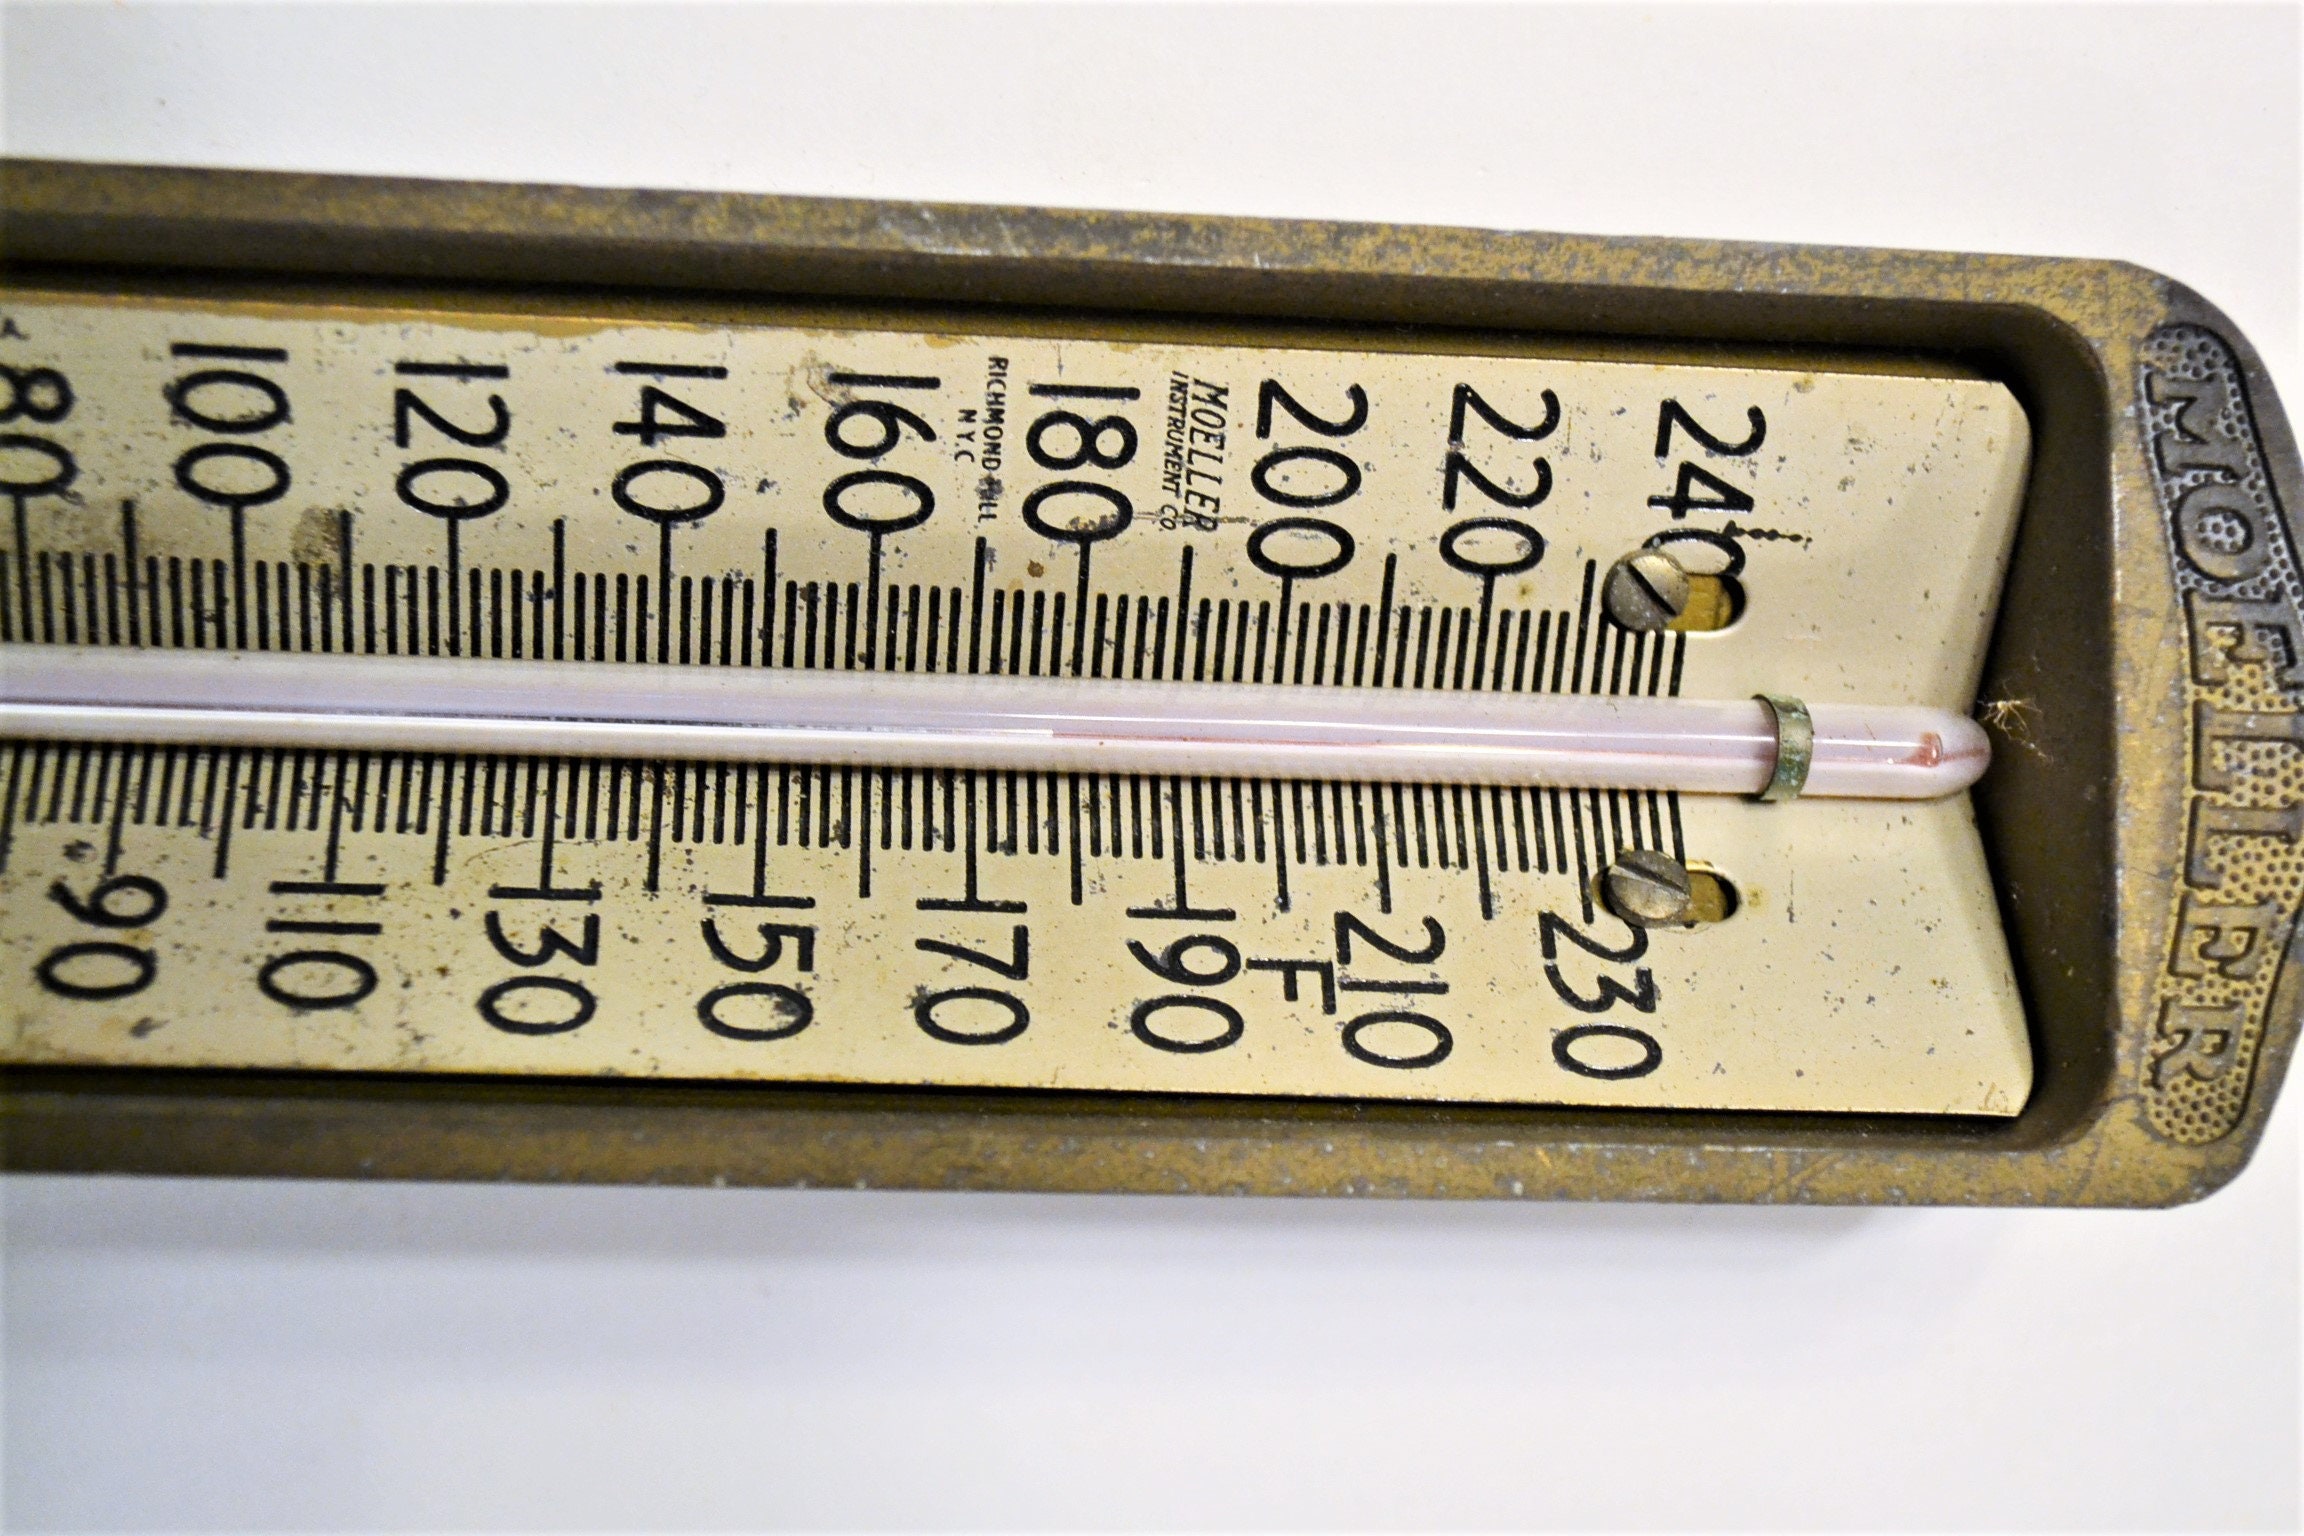 Measuring Device, Draper's Self Recording Thermometer, New York City: c.  1900 – George Glazer Gallery, Antiques